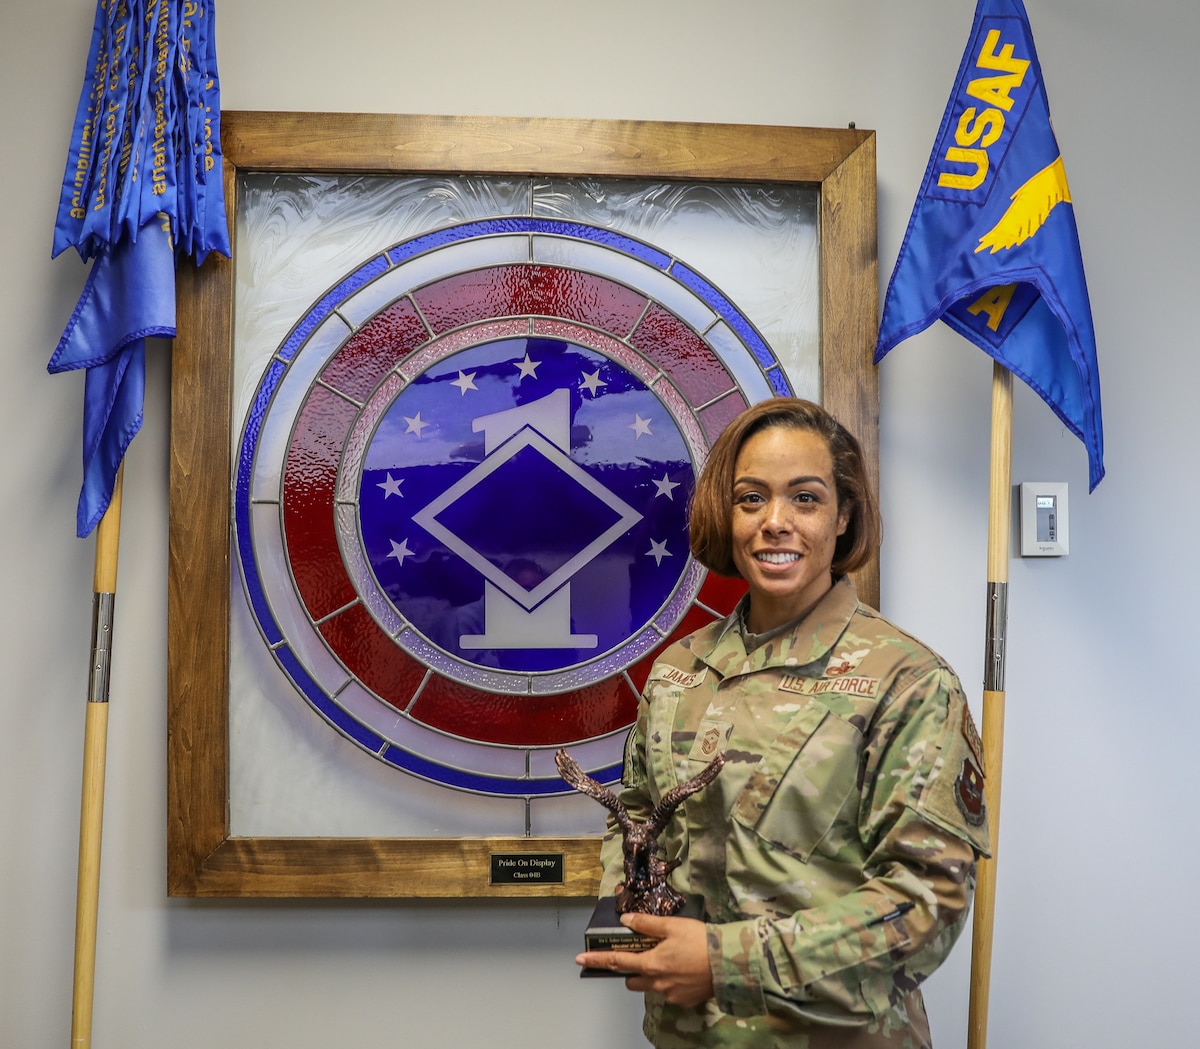 Senior Master Sergeant James receives the 2022 AETC Educator of the year award in the enlisted category.

AETC Educator of the Year
Enlisted Category
Senior Master Sgt. Candace James
Ira C. Eaker Center for Leadership Development